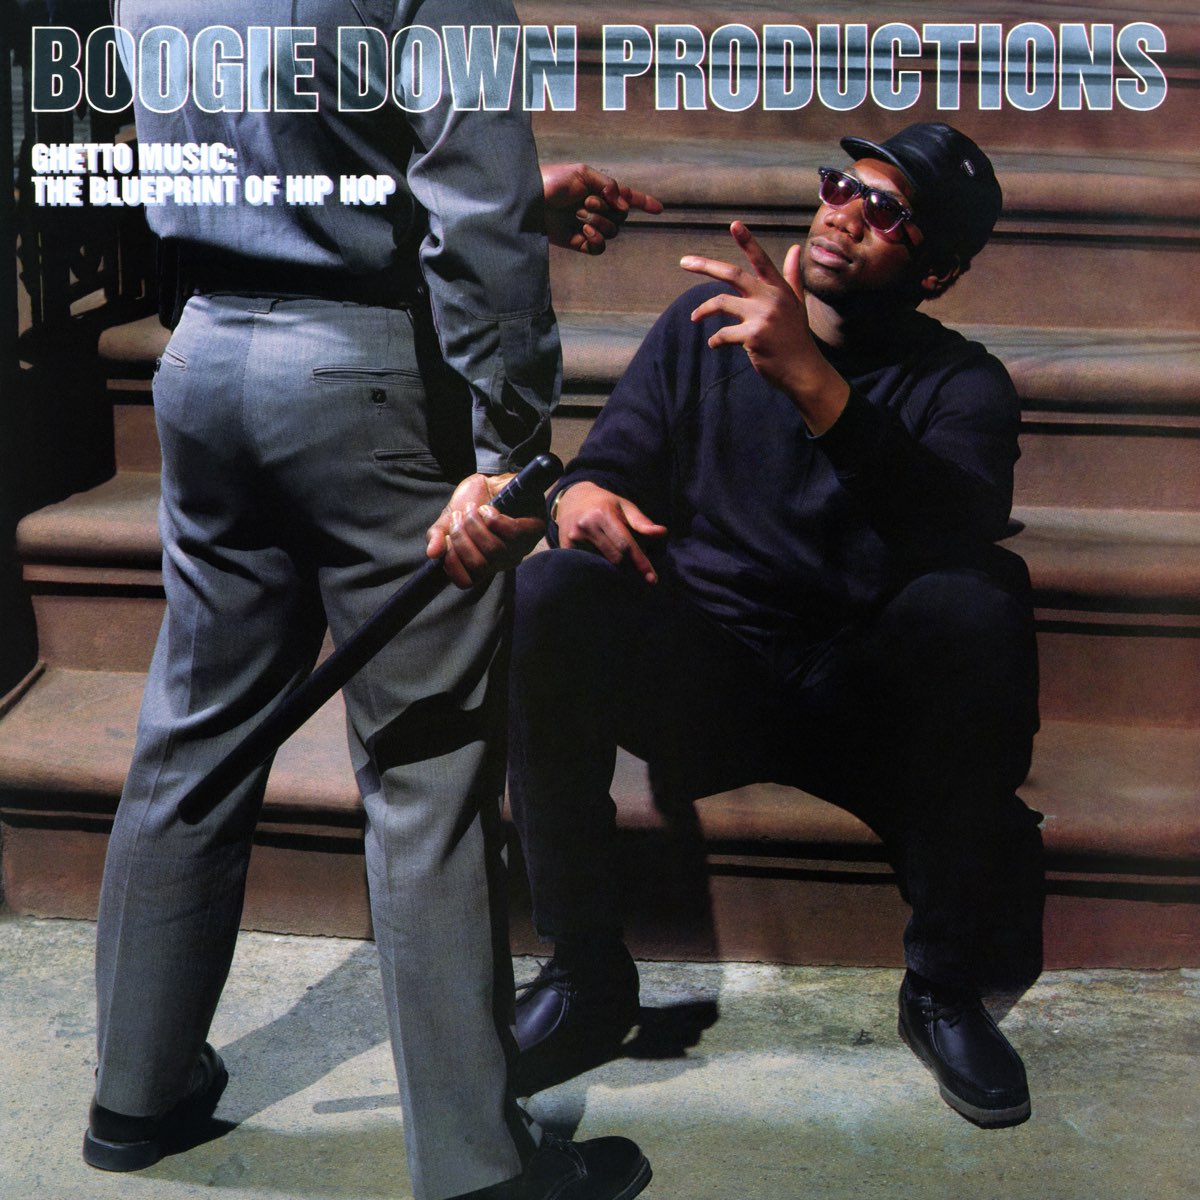 audio review : Ghetto Music [ The Blueprint Of Hip-Hop ] ( album ) ... Boogie Down Productions